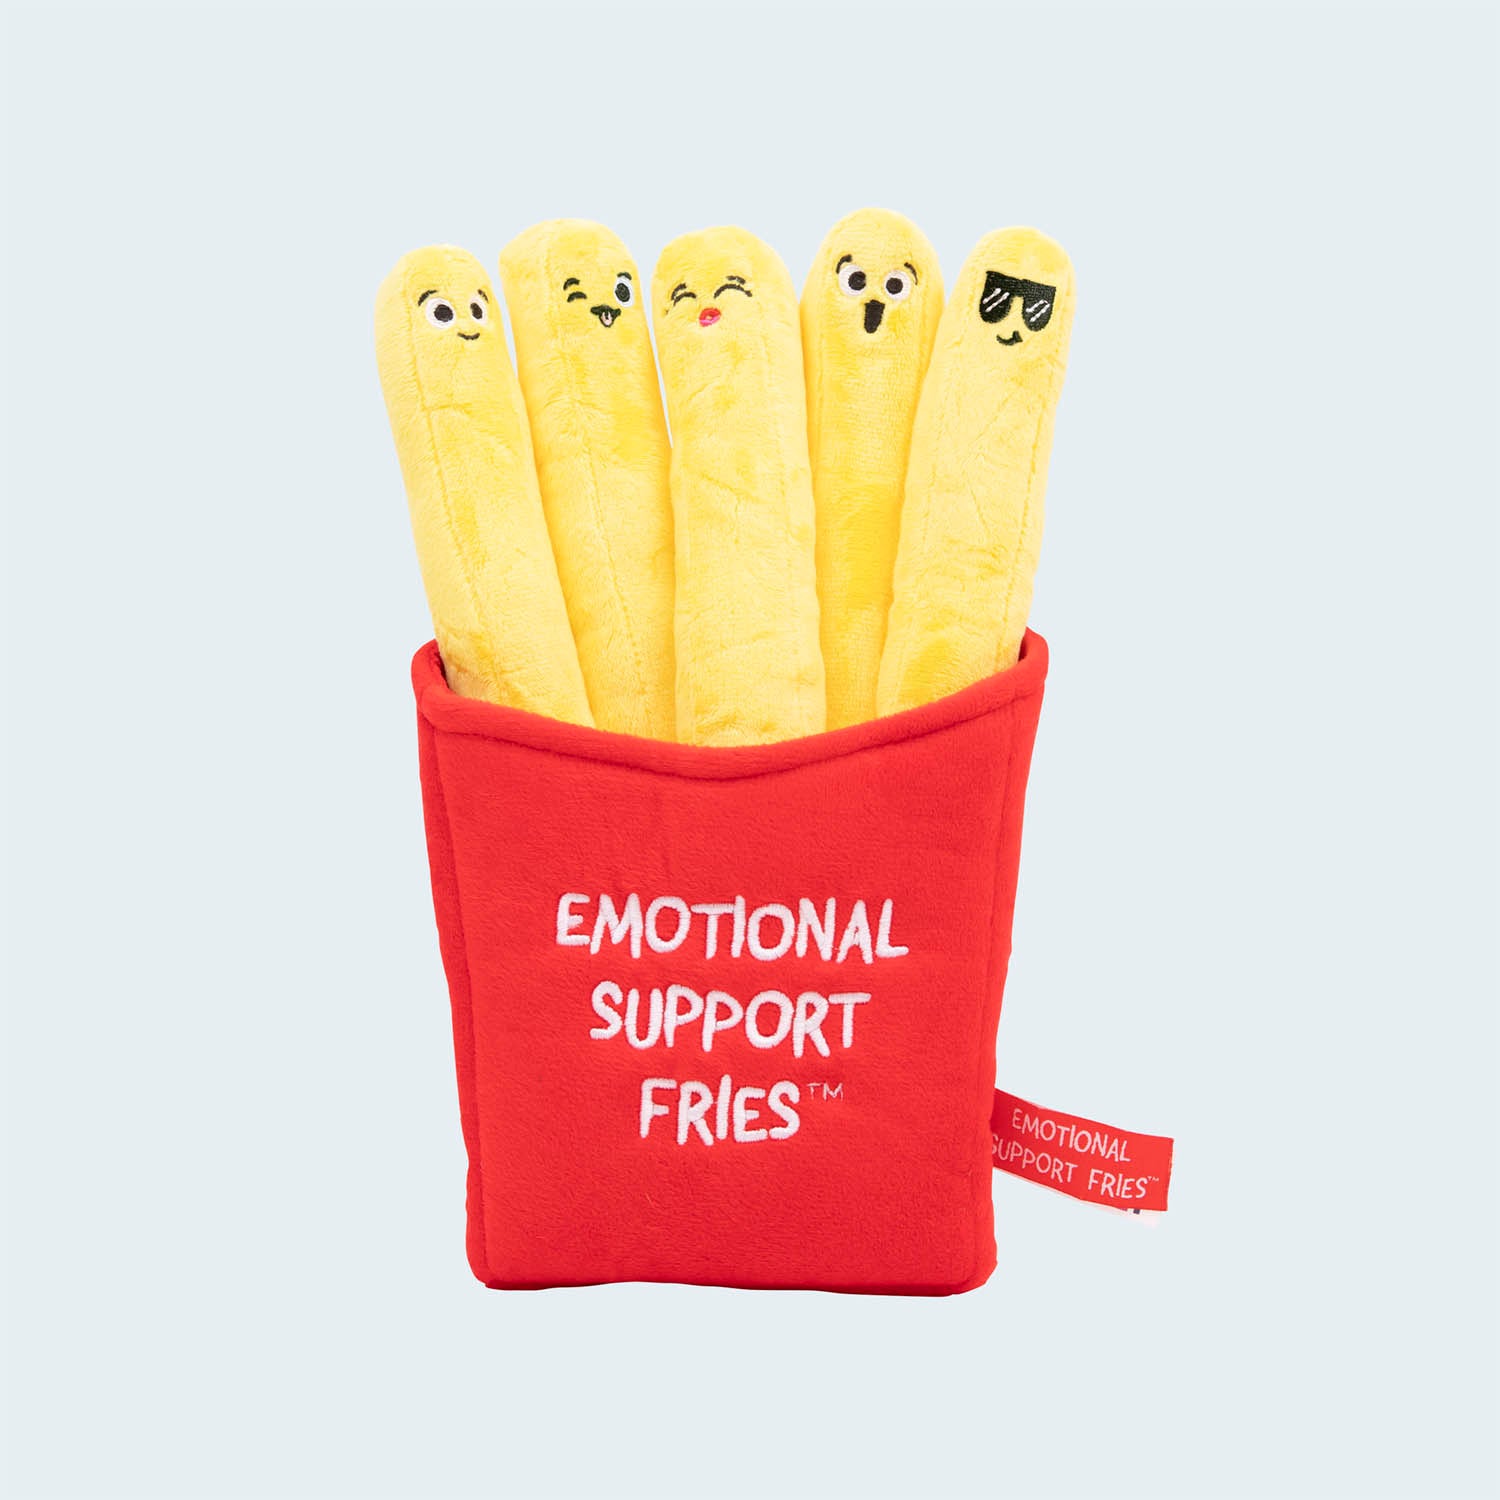 emotional-support-fries-game-box-and-game-play-01-what-do-you-meme-by-relatable